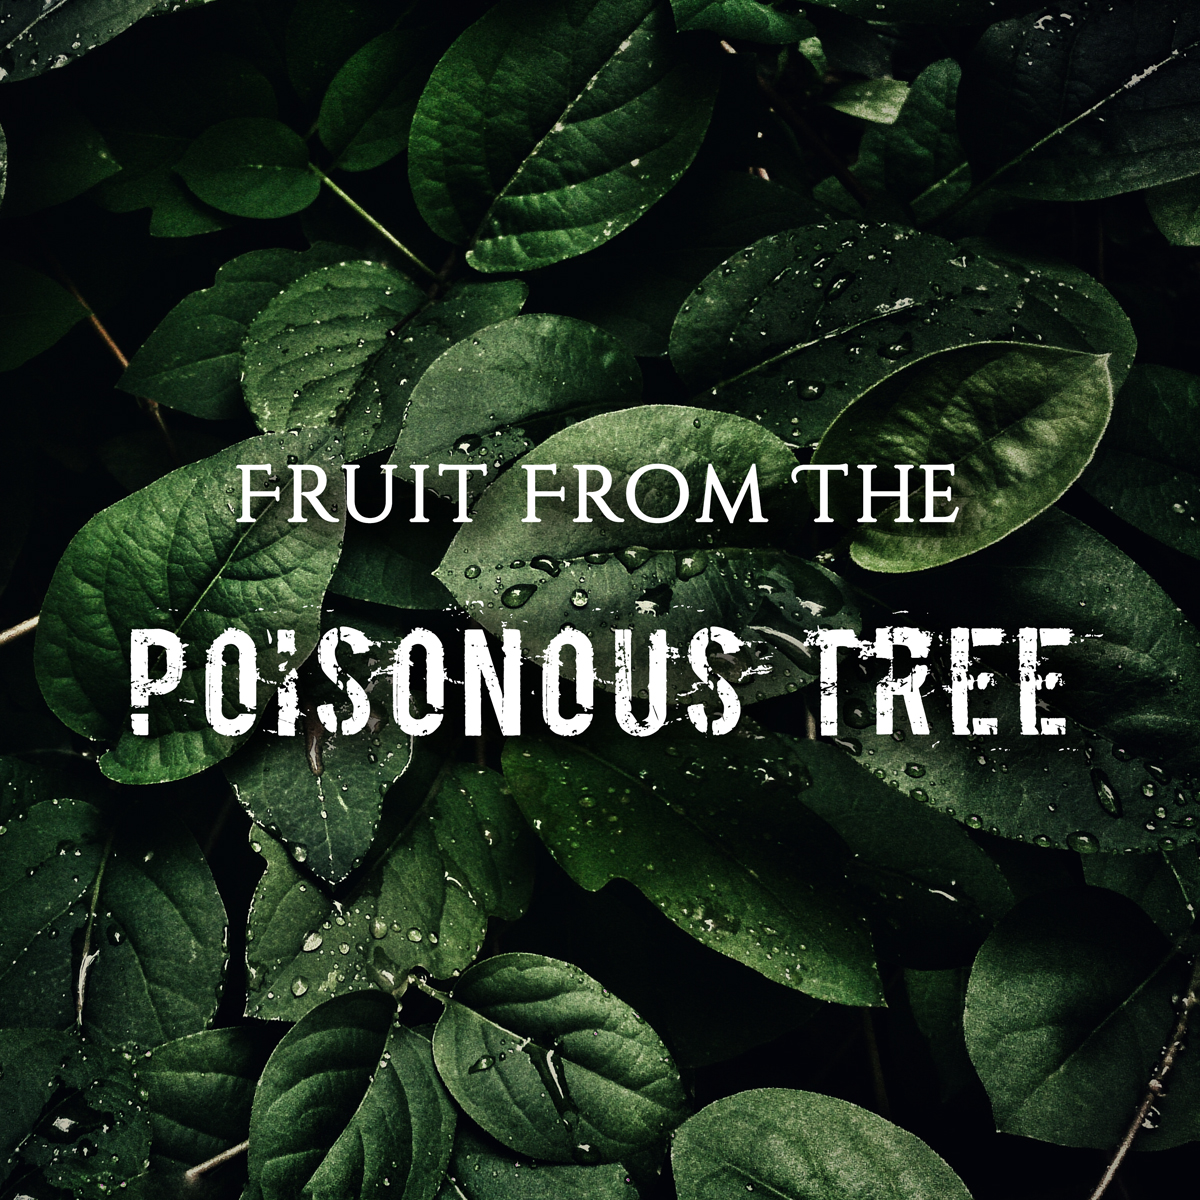 Examples of fruits of the poisonous tree